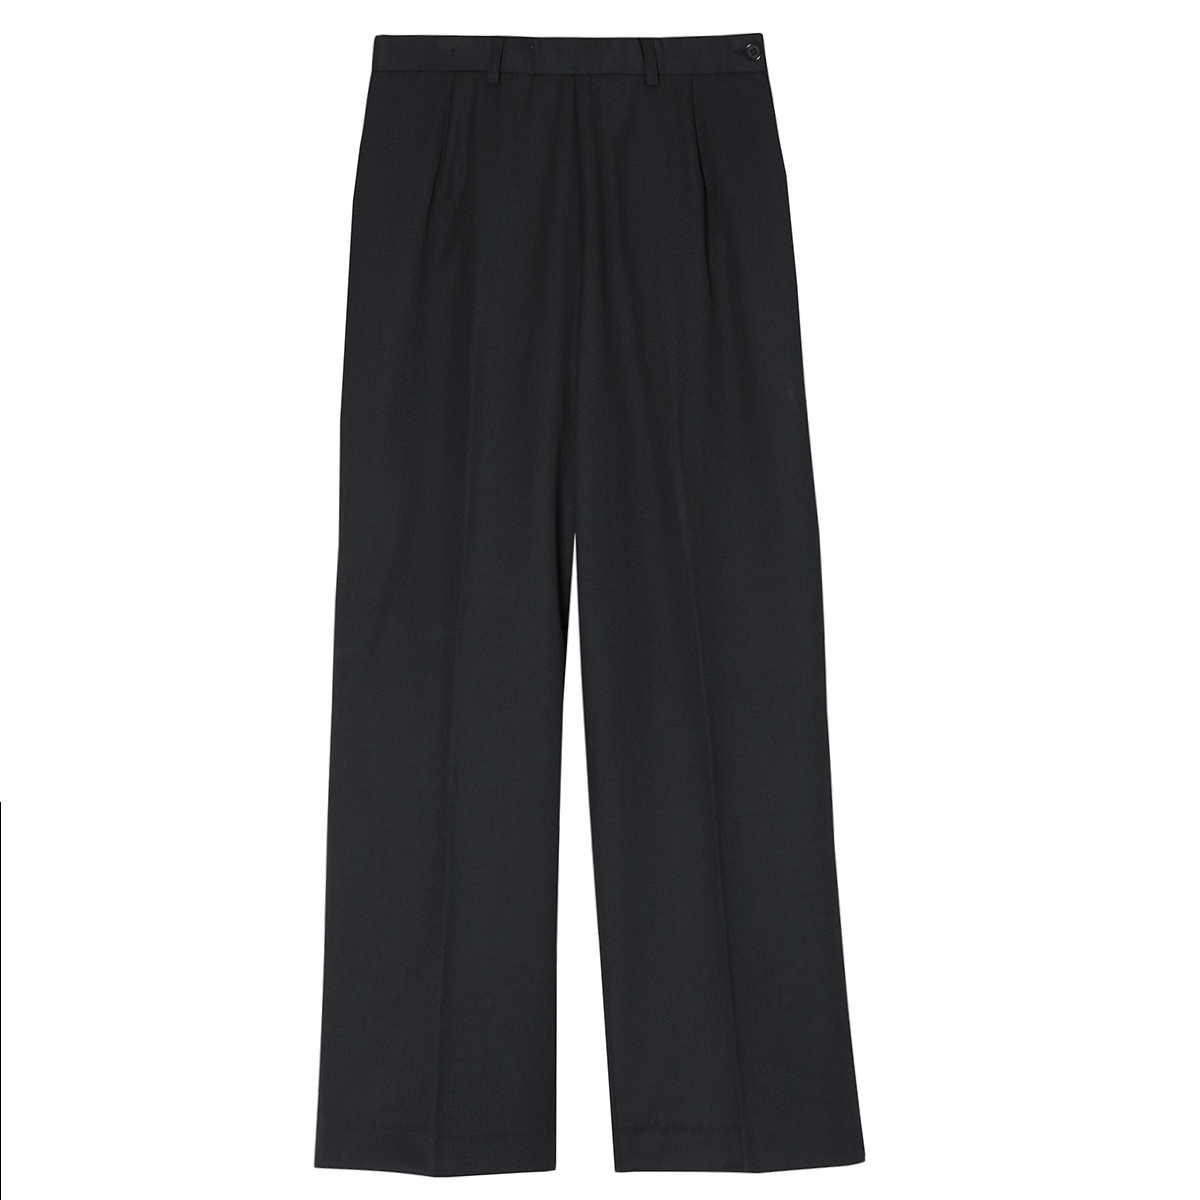 Women's Flat Front Work Trousers (Sizes 8-14) Bootleg Formal Office ...